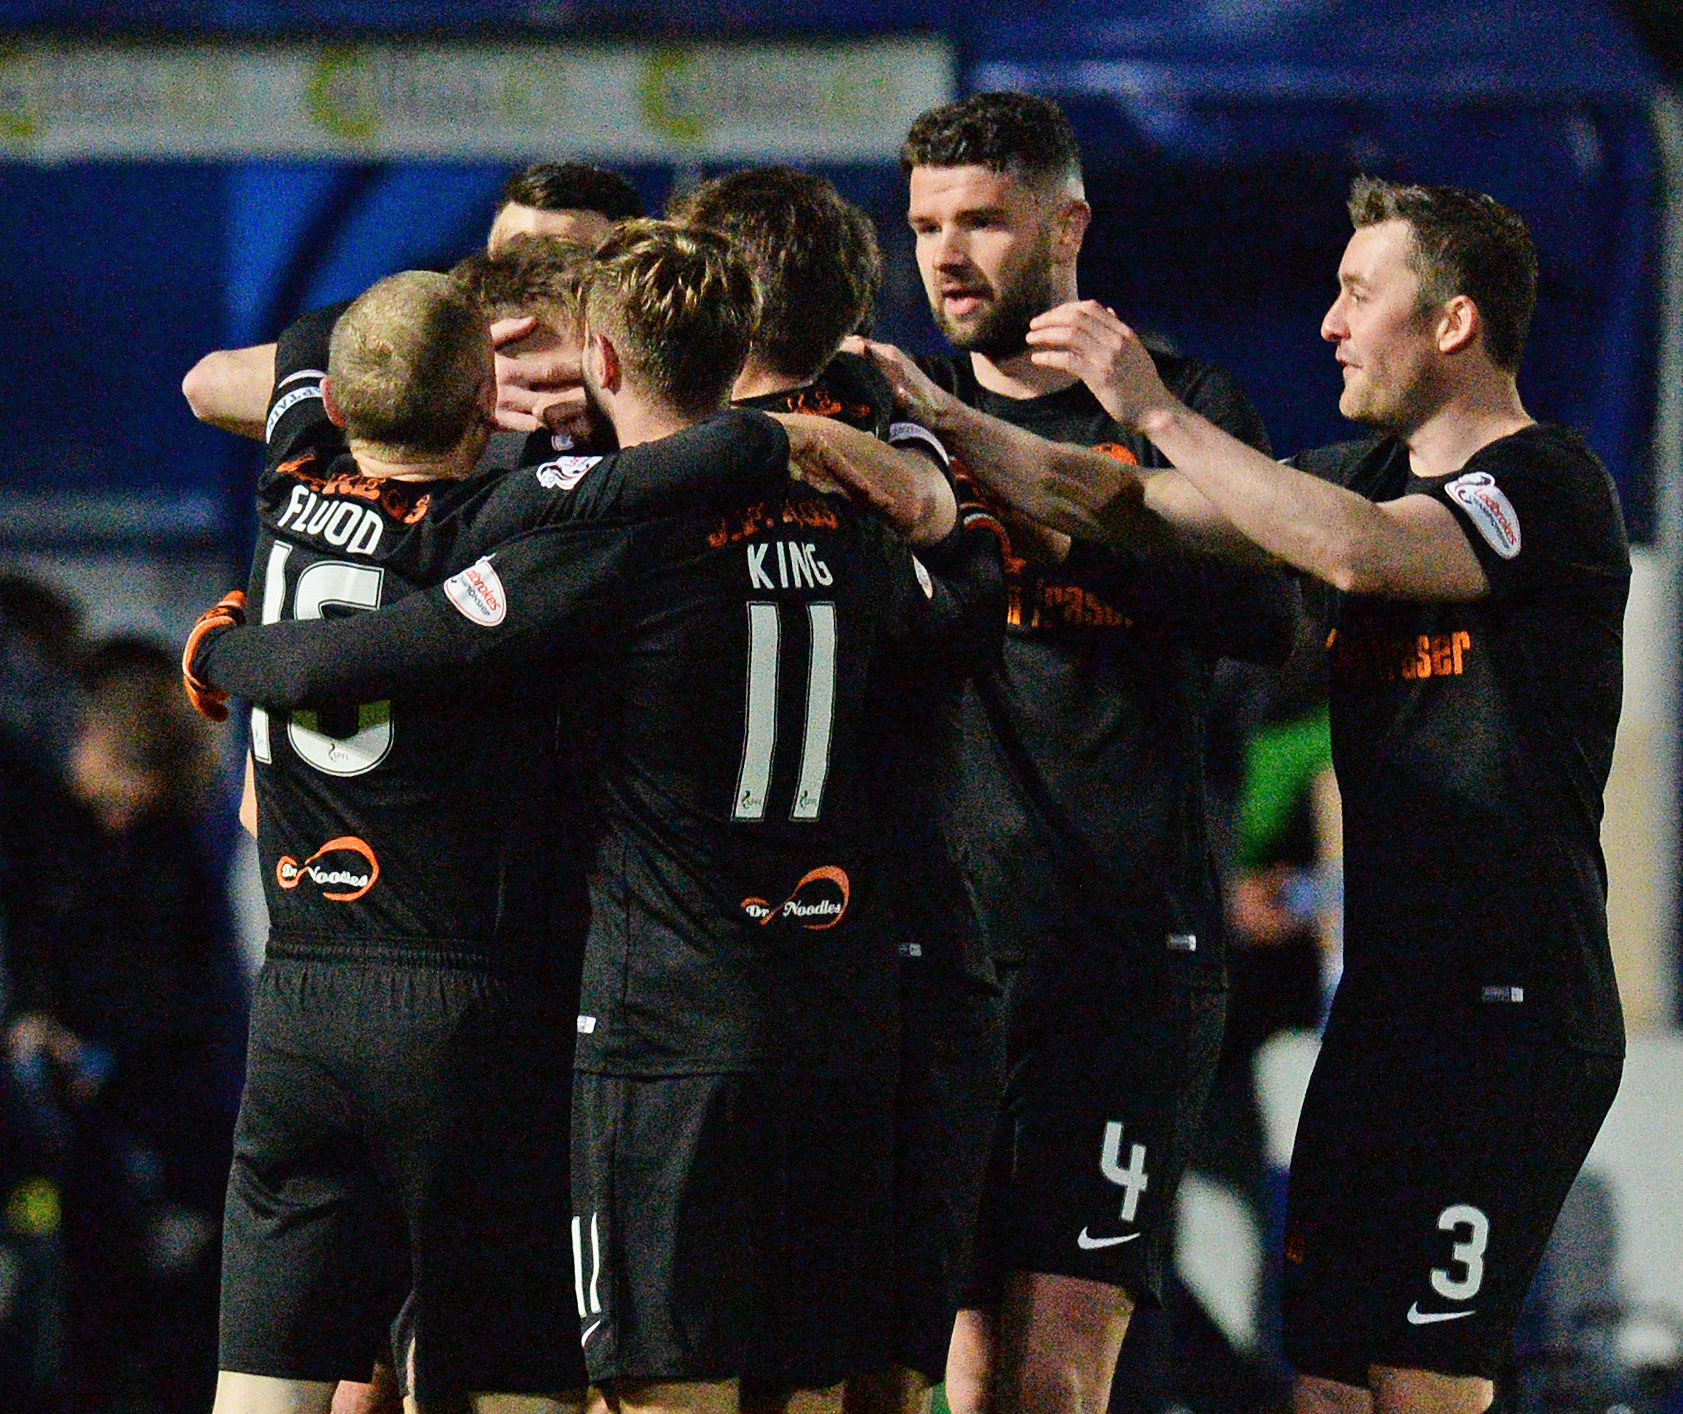 The United players celebrate Matty Smiths first goal.